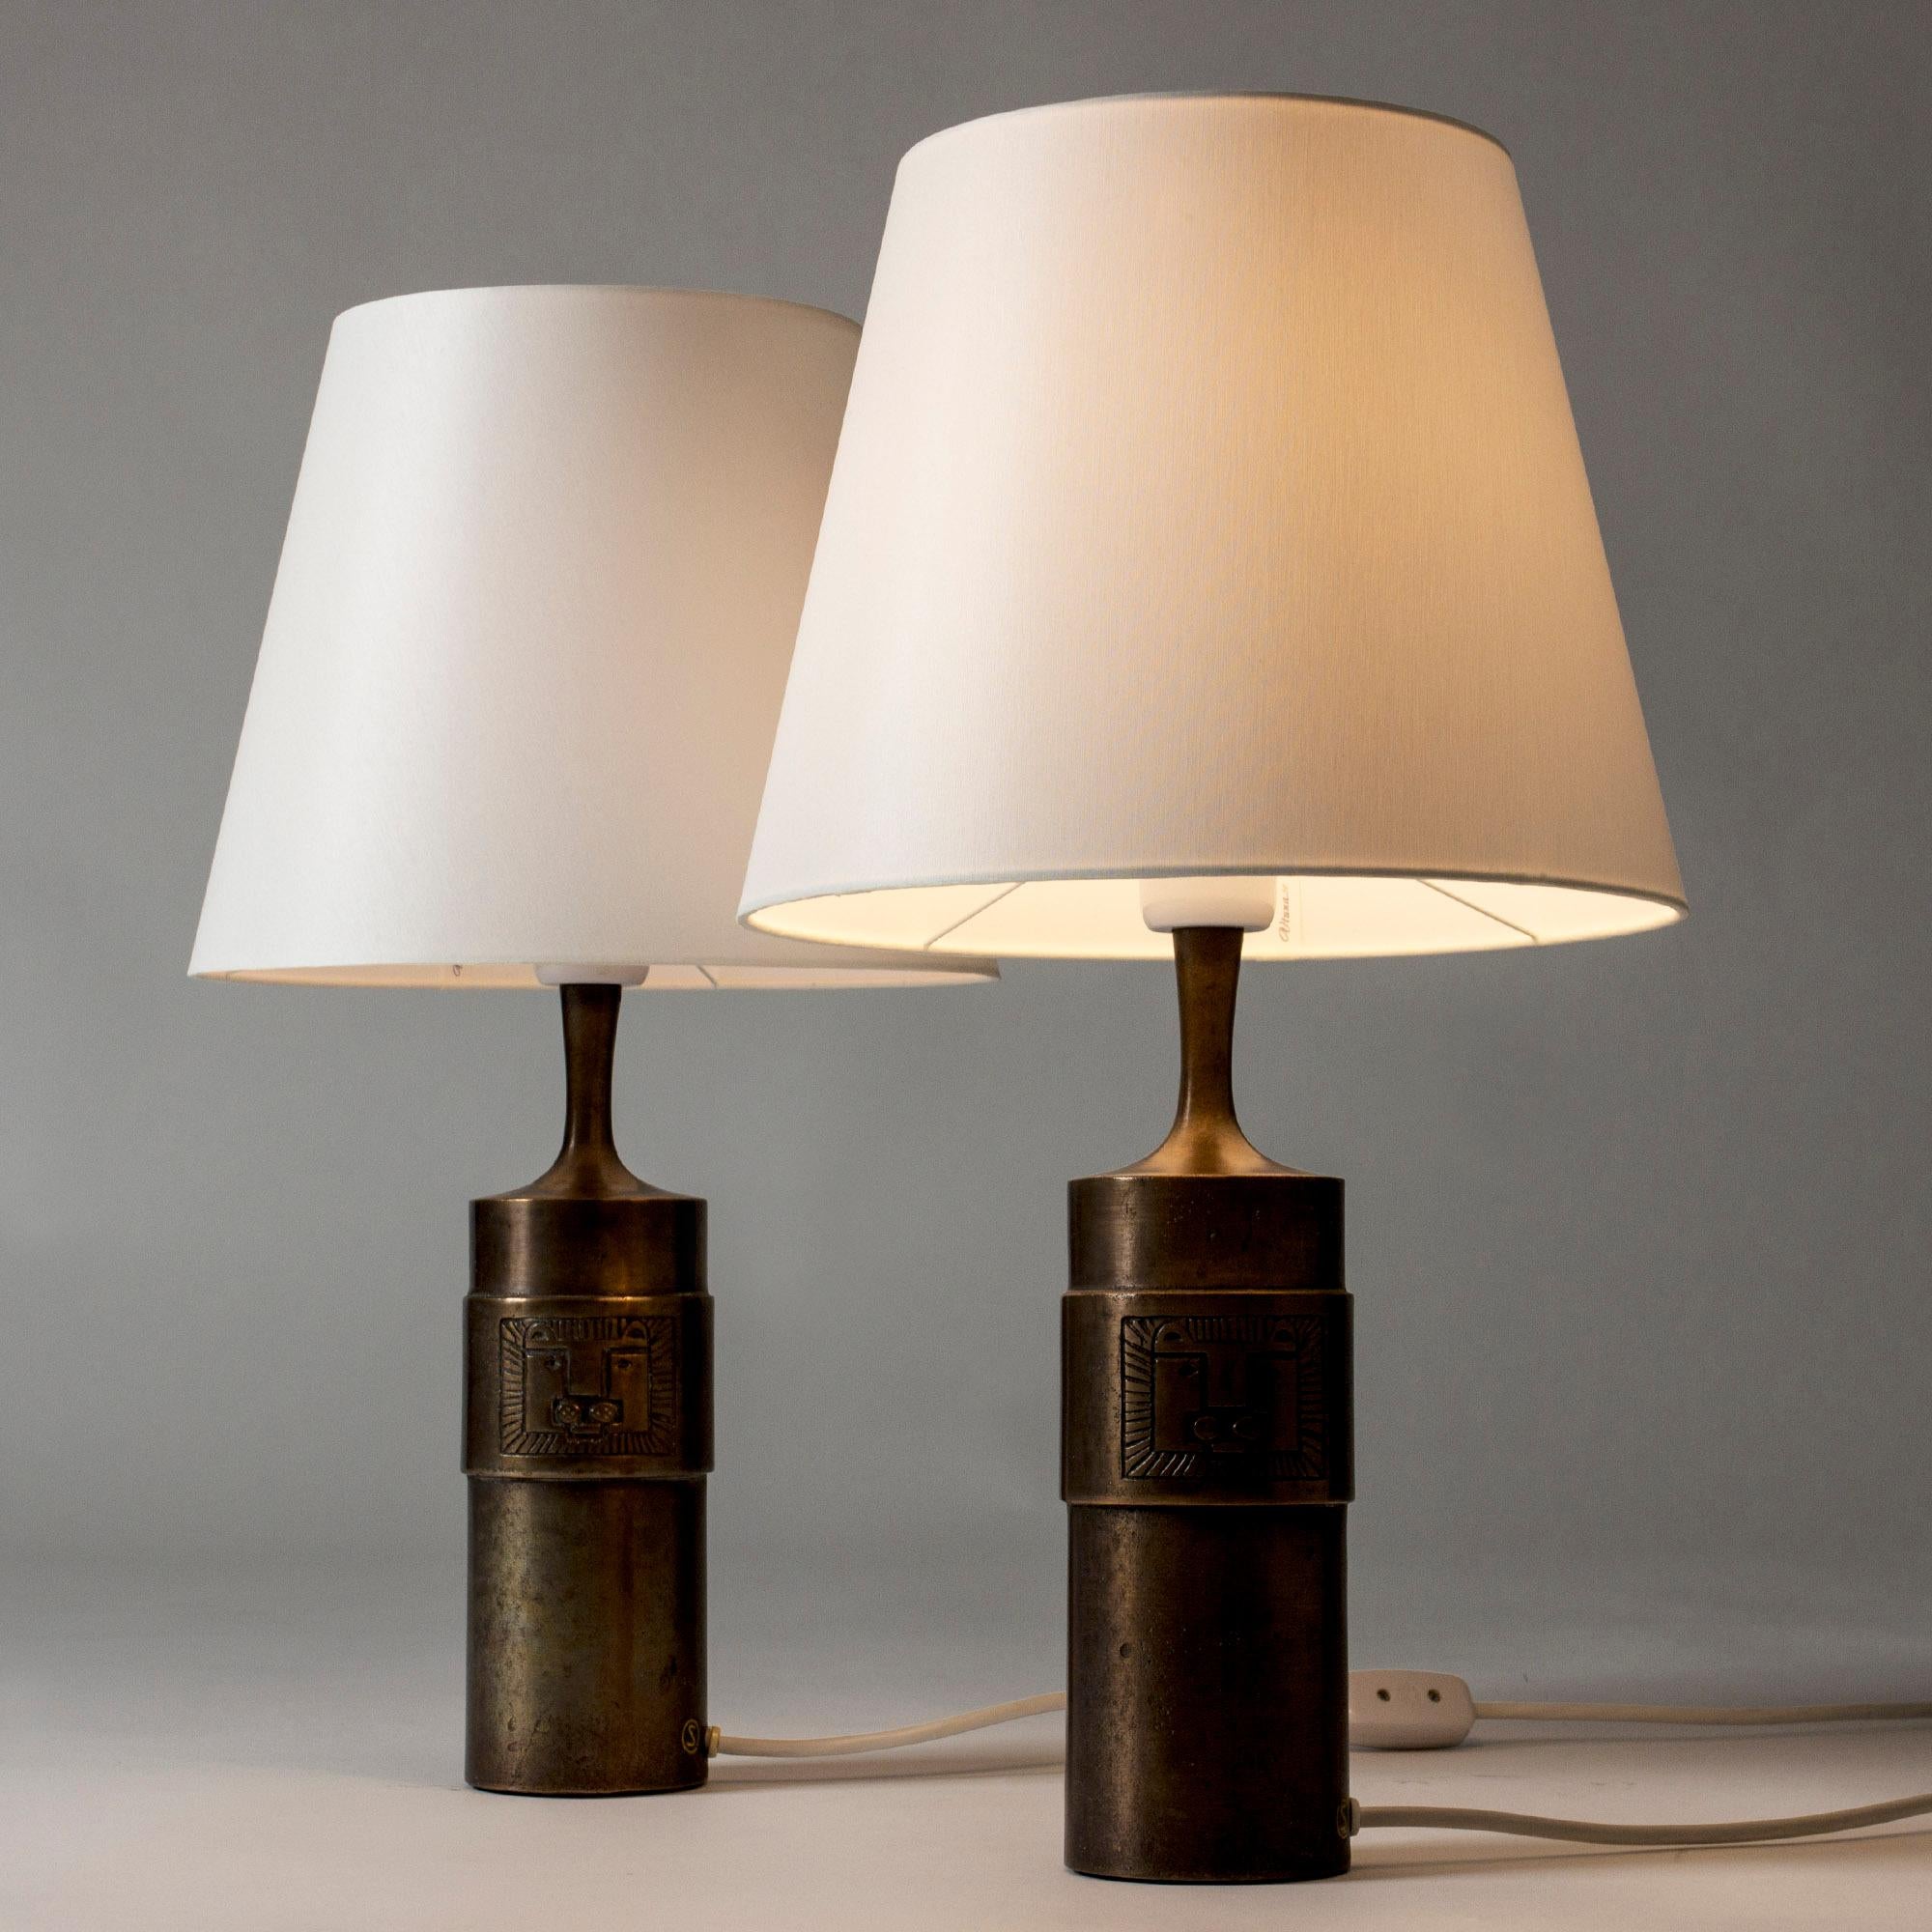 Swedish Pair of Bronze Table Lamps by Stig Blomberg, Sweden, 1960s